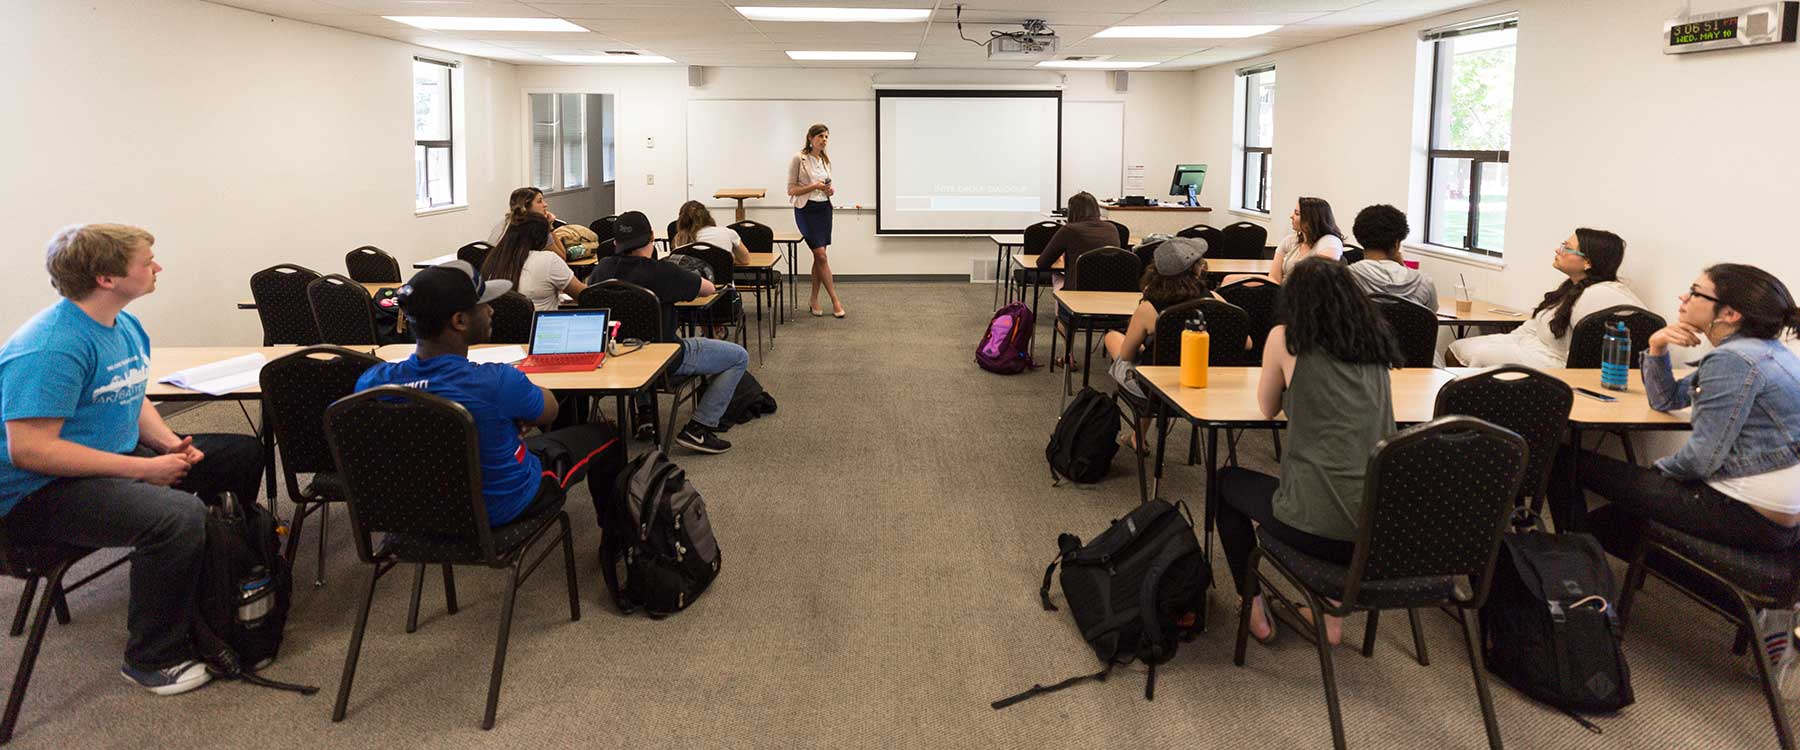 A professor stands at the front of a classroom speaking to the students.